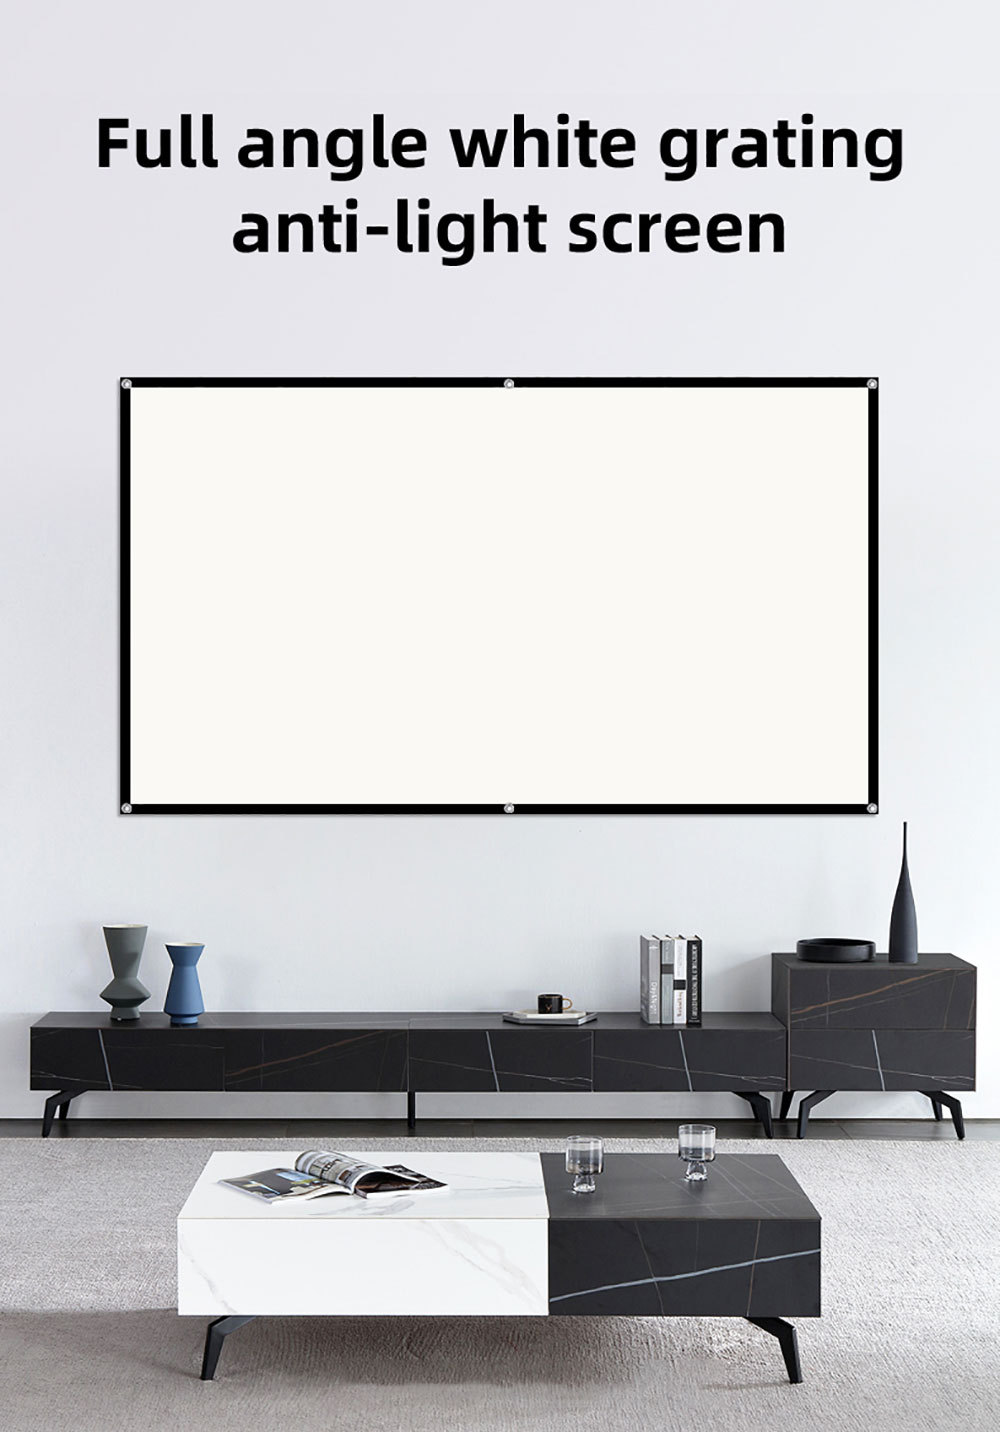 VEIDADZ Wall Hanging Projector Screen 4K HD Anti-light White Grid Screen 72inch 160° Full Viewing 16:9 Anti-wrinkle Waterproof Home Theater Projection Curtain